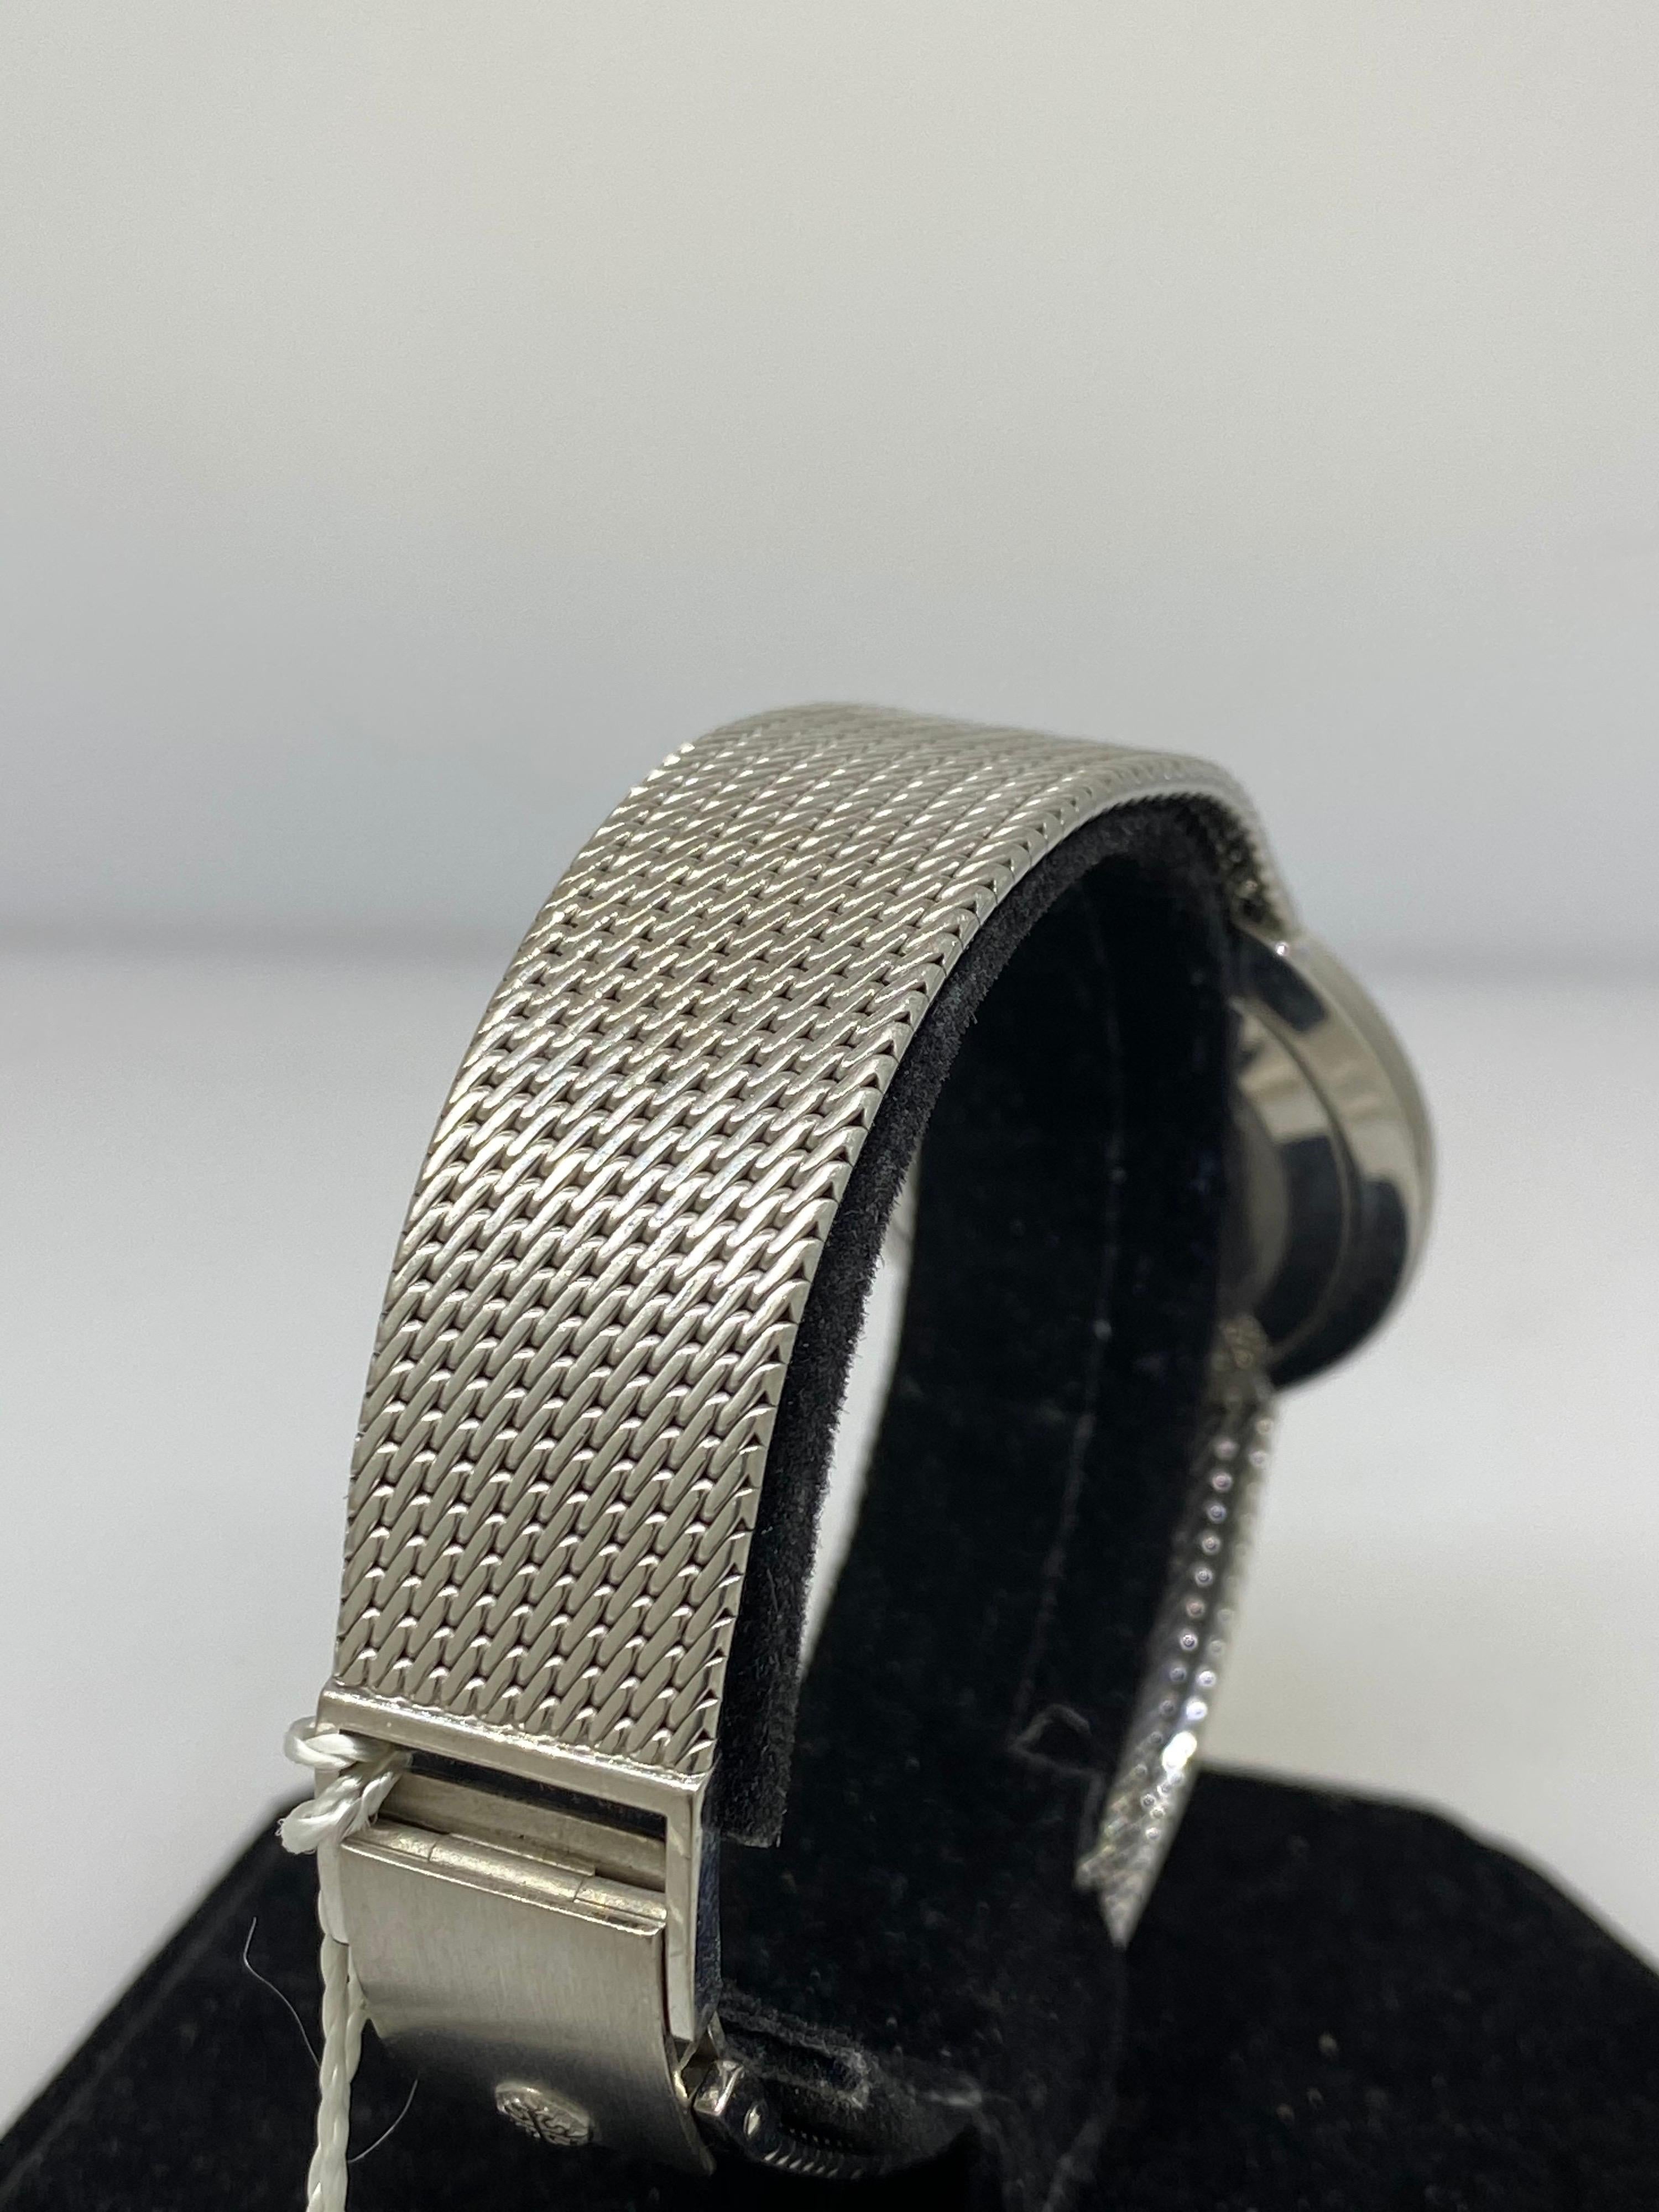 Patek Philippe Calatrava White Gold White Dial Bracelet Men's Watch 3919 In Excellent Condition For Sale In New York, NY